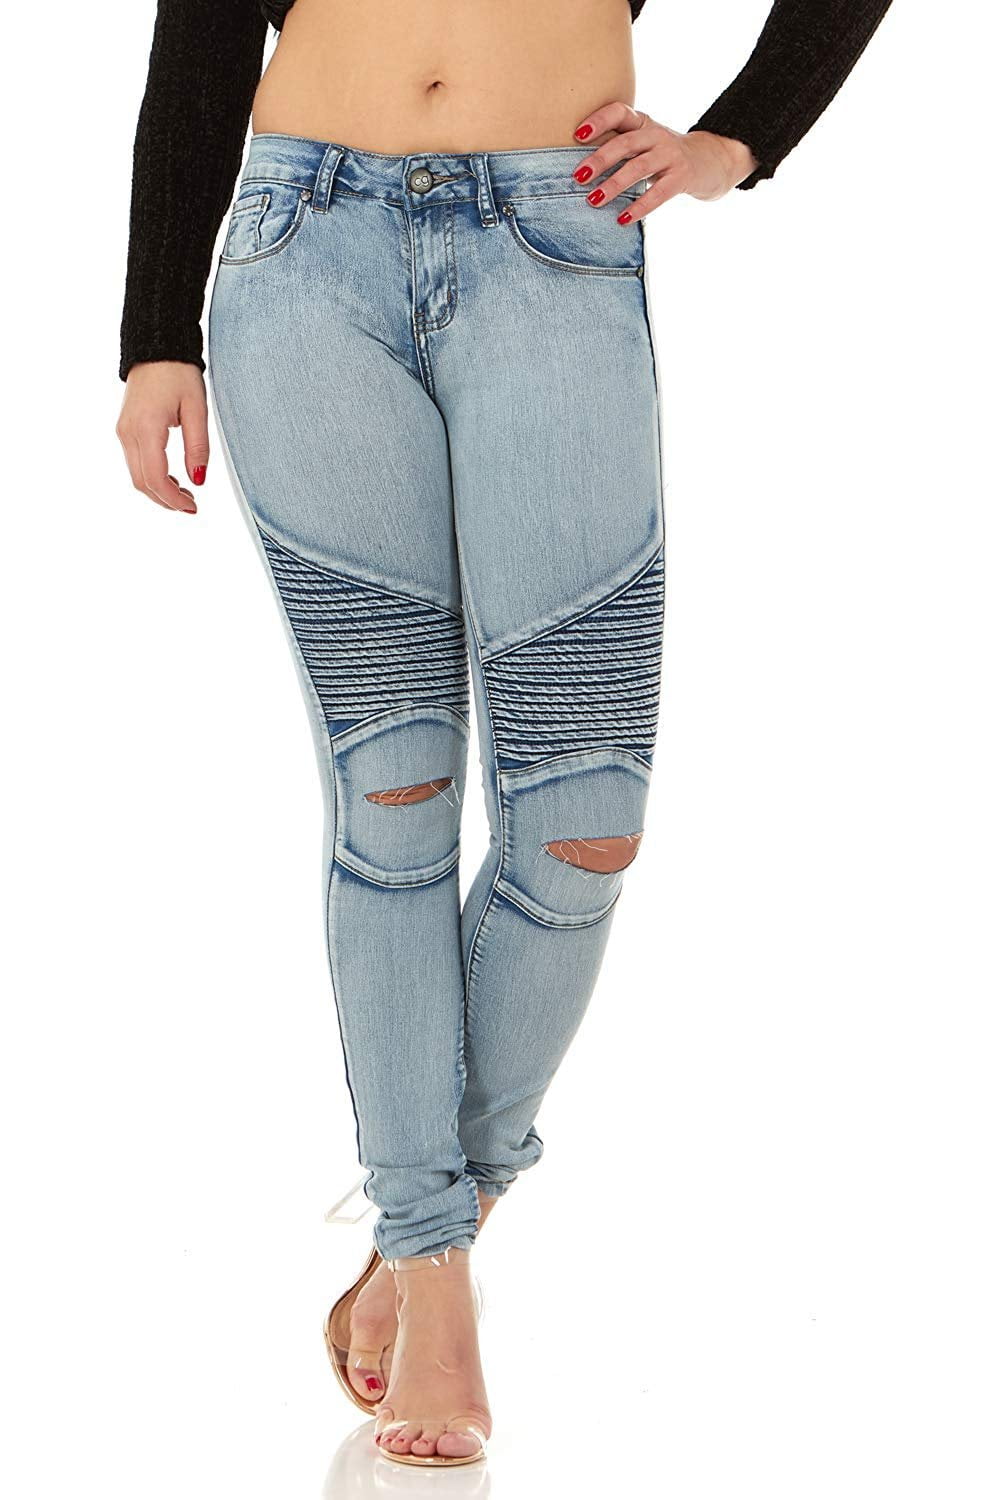 knee ripped jeans for girls